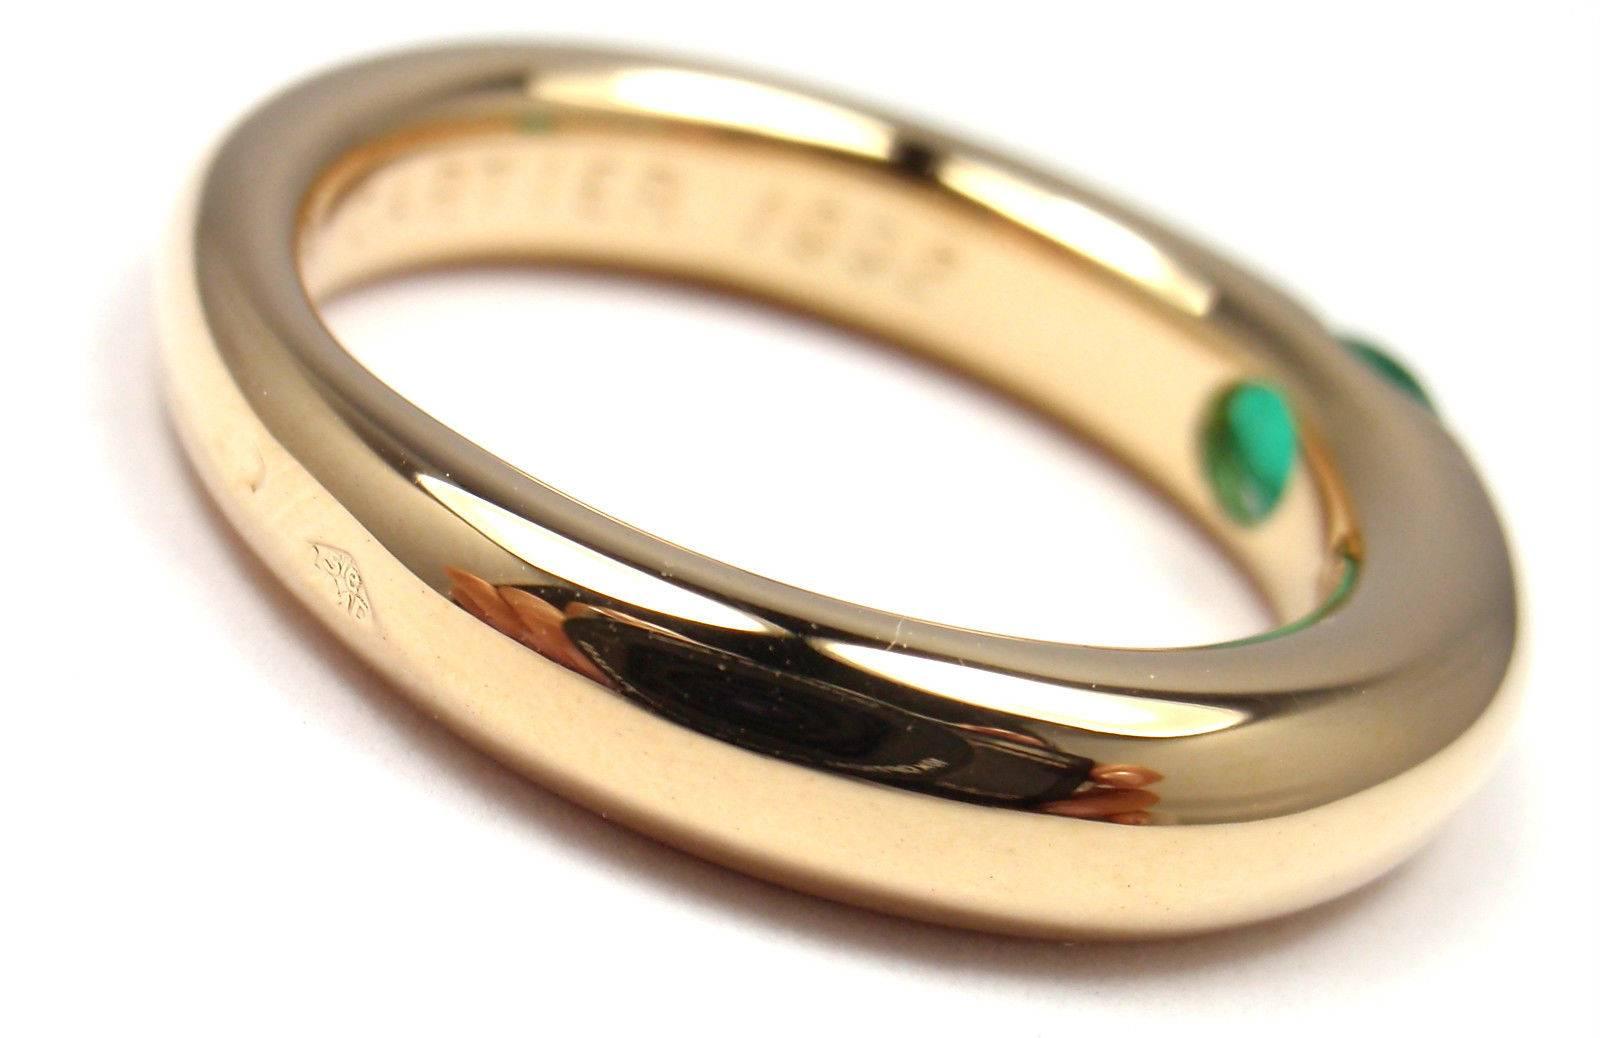 18k Yellow Gold Ellipse Emerald Band Ring by Cartier.
With 1 oval-shaped beautiful emerald 5mm x 4mm.
This ring comes with Cartier certificate.

Details:
Width: 4mm
Weight: 9 grams
Ring Size: 6 1/4 US, European 53
Stamped Hallmarks: Cartier 750 53